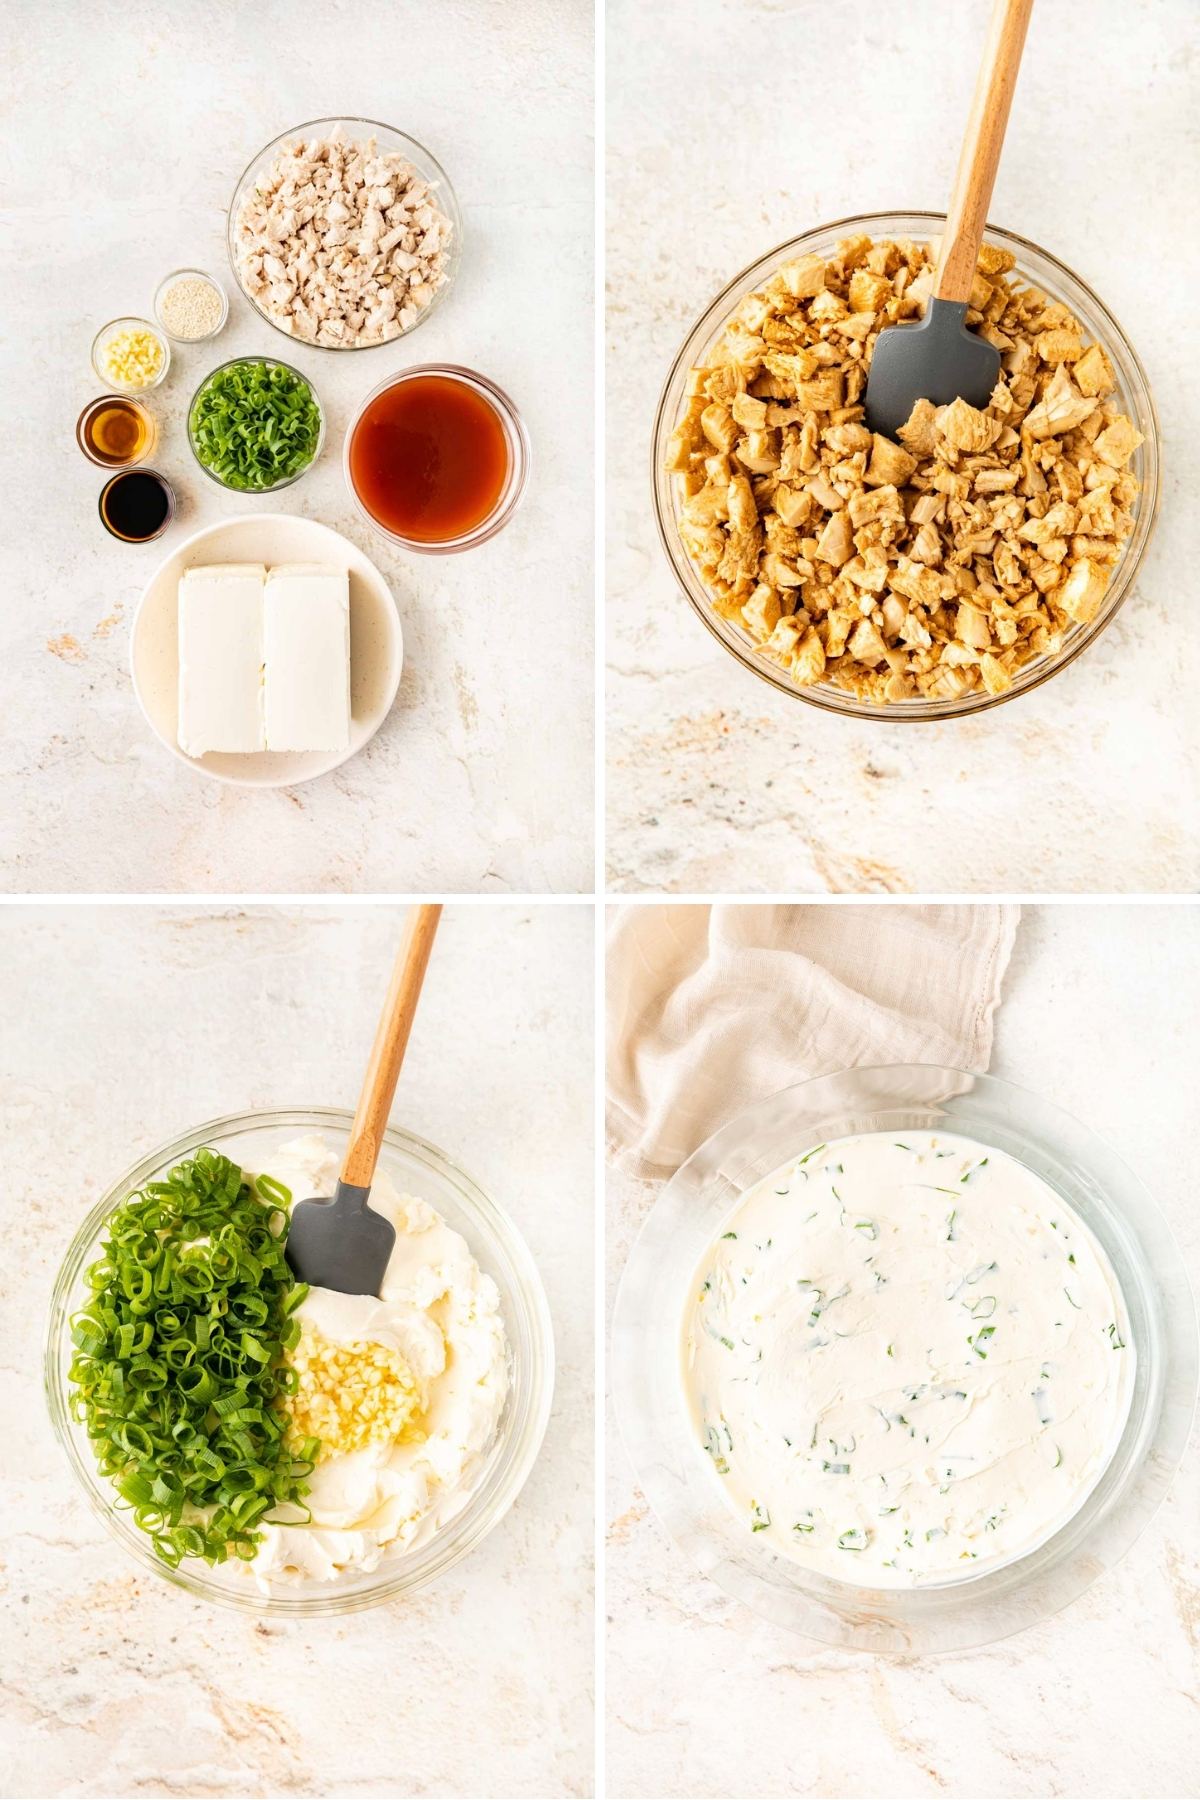 Sweet and Sour Chicken Dip collage